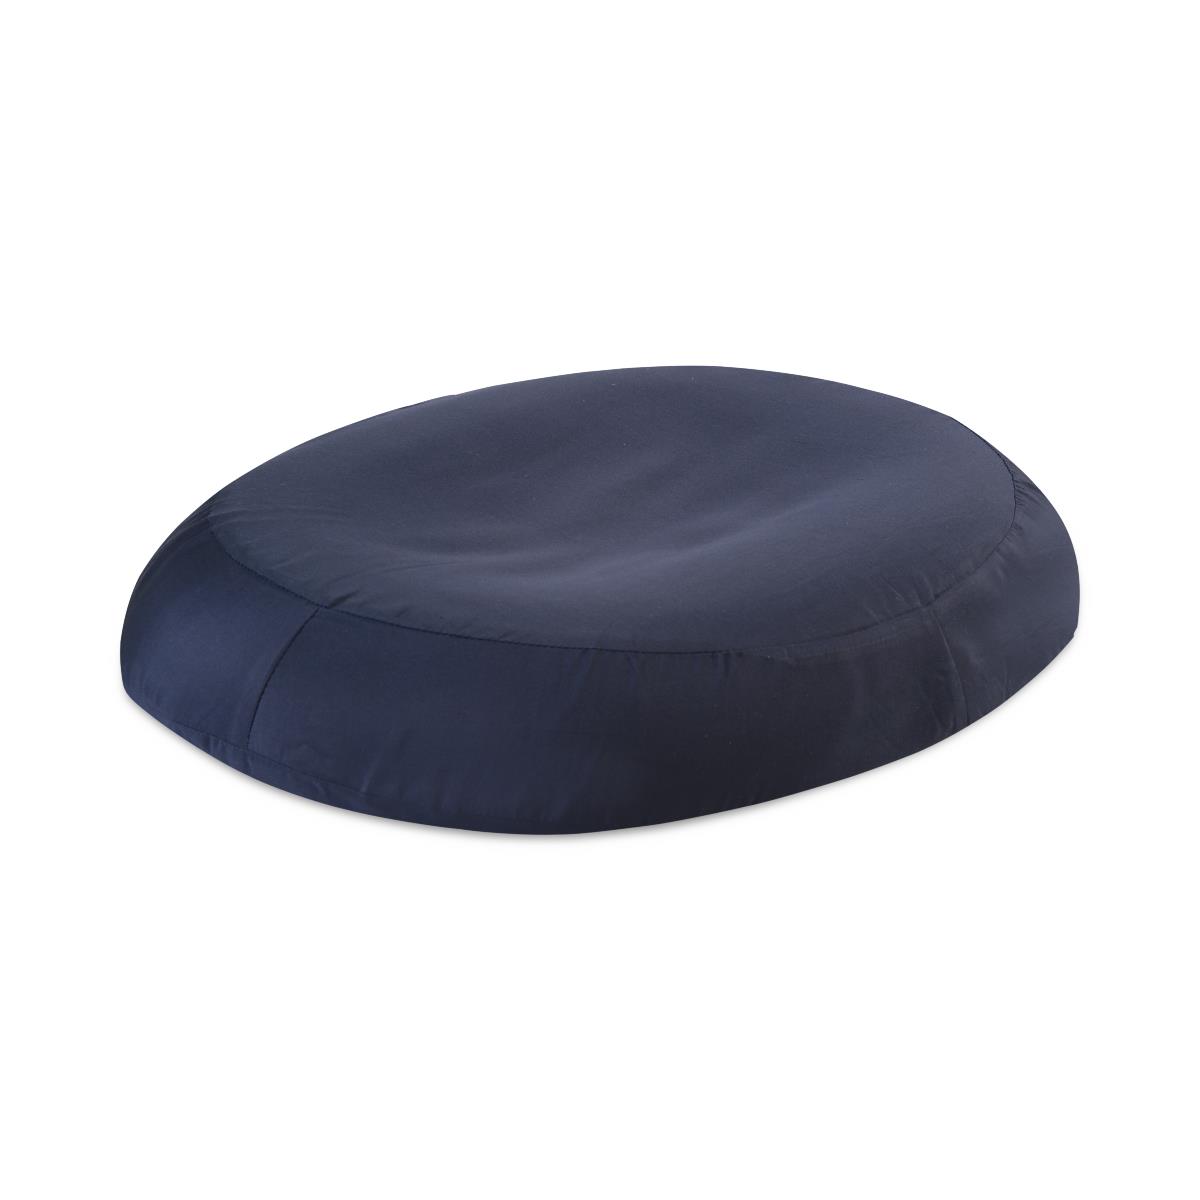 HealthSmart Invalid Ring Donut Cushion with Cover - Seat Cushions